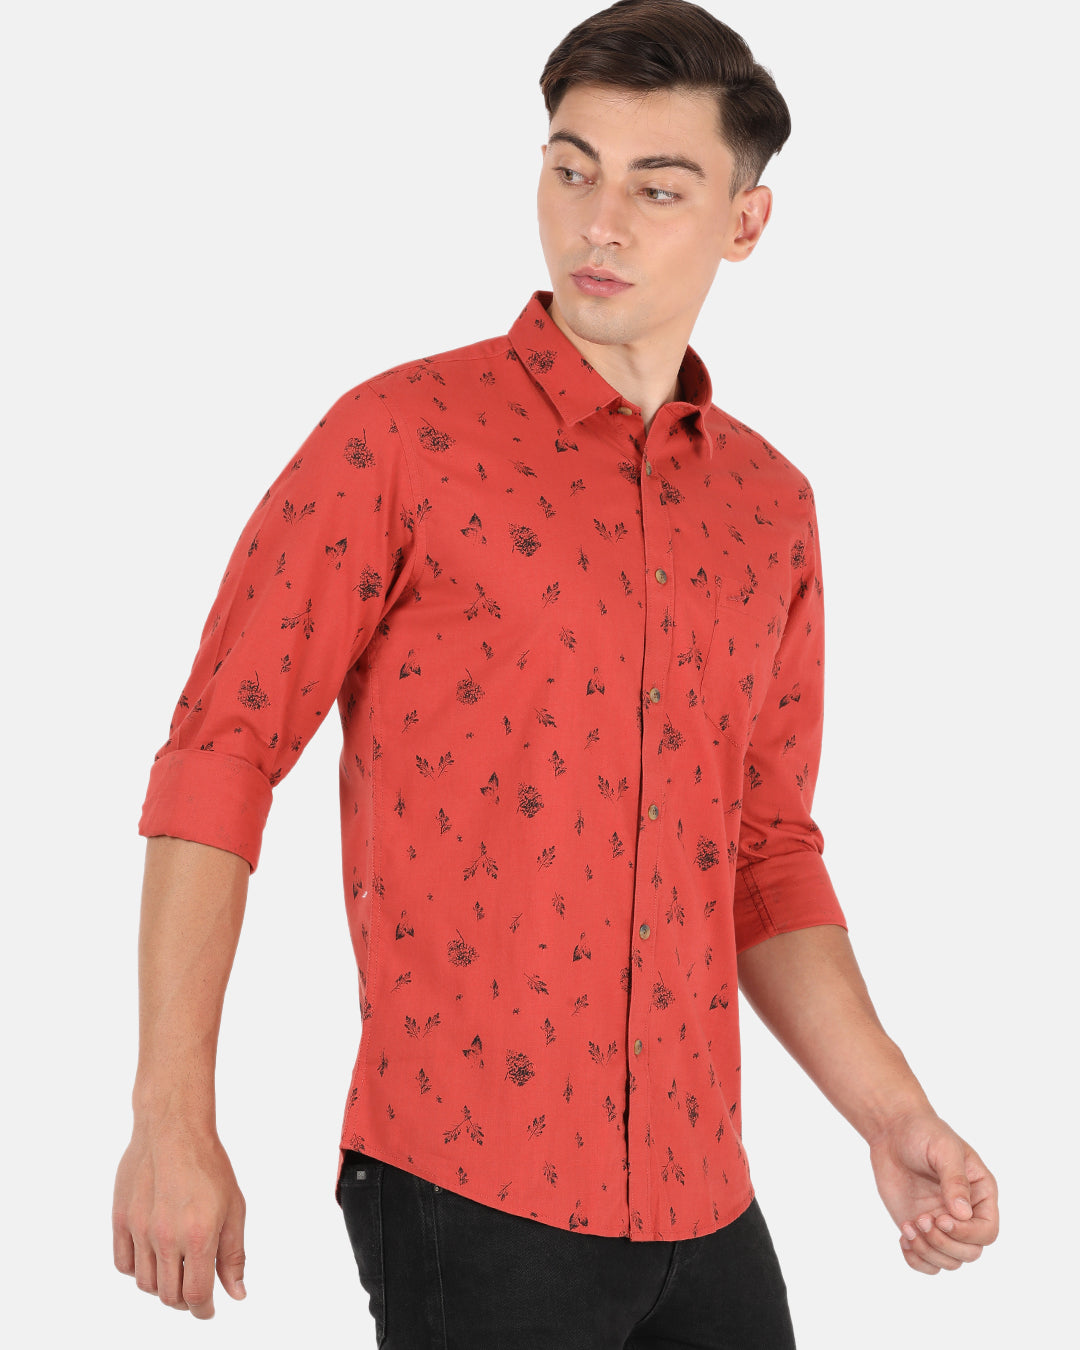 Crocodile Casual Full Sleeve Slim Fit Printed Red with Collar Shirt for Men